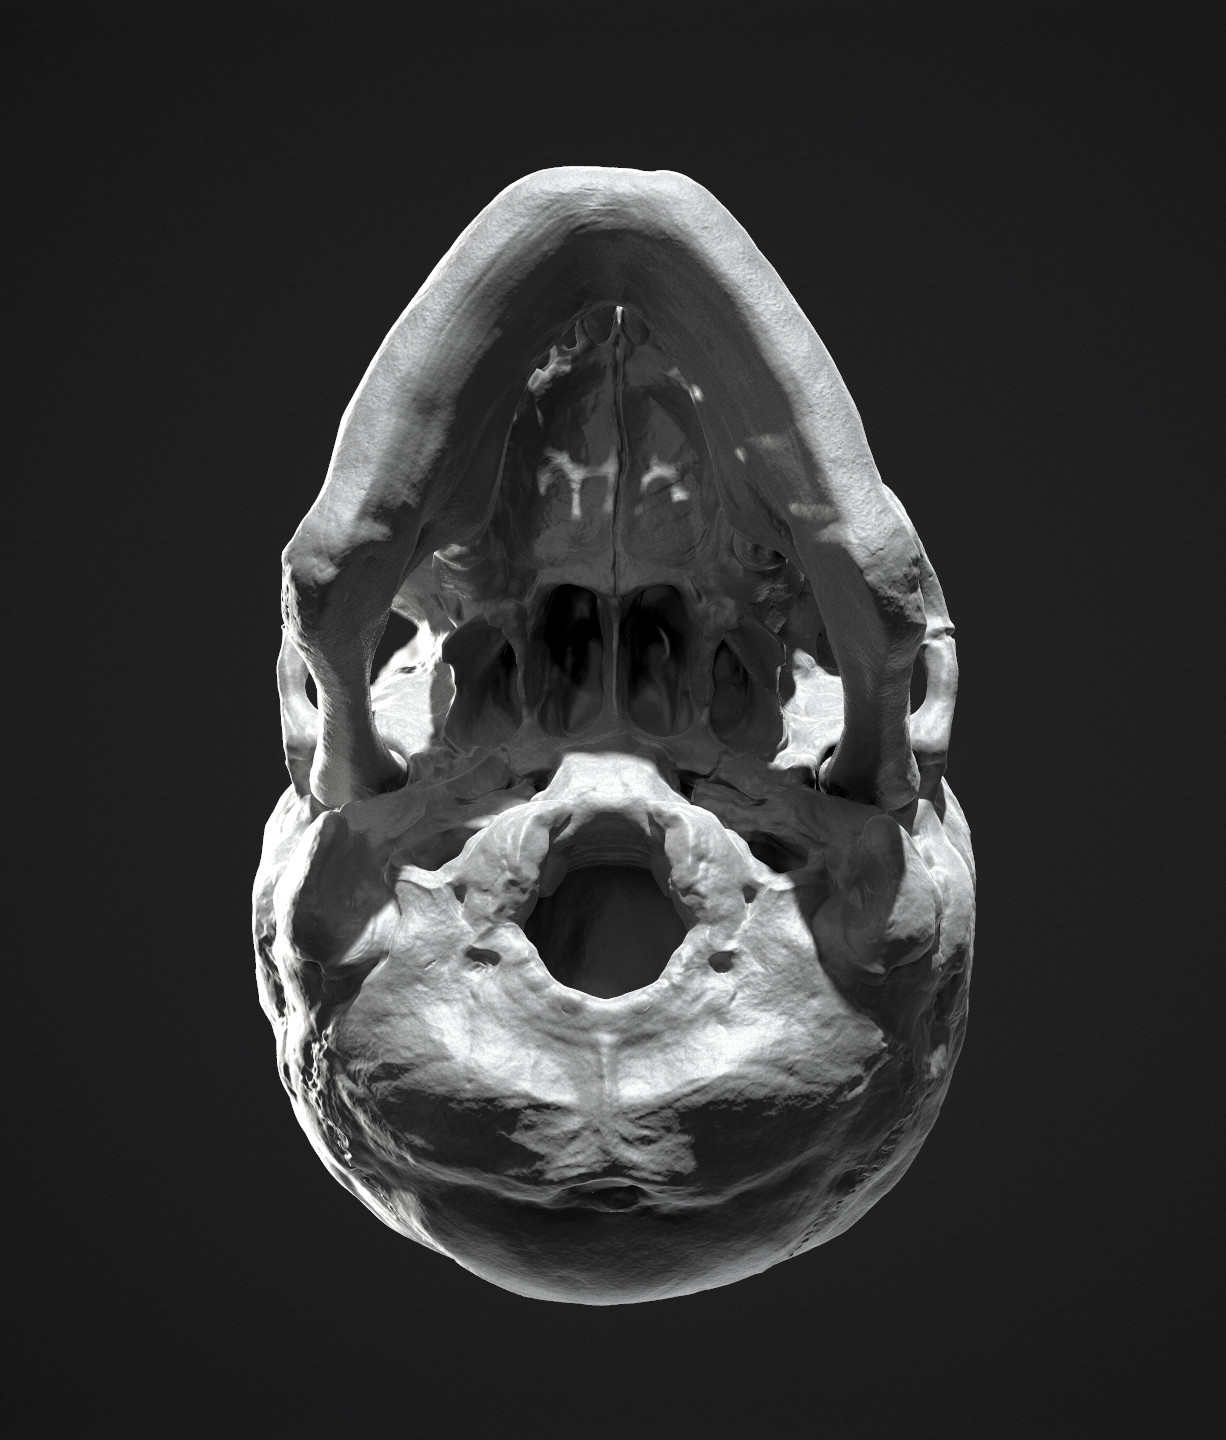 Bottom - there are some crazy shapes going on in skulls.